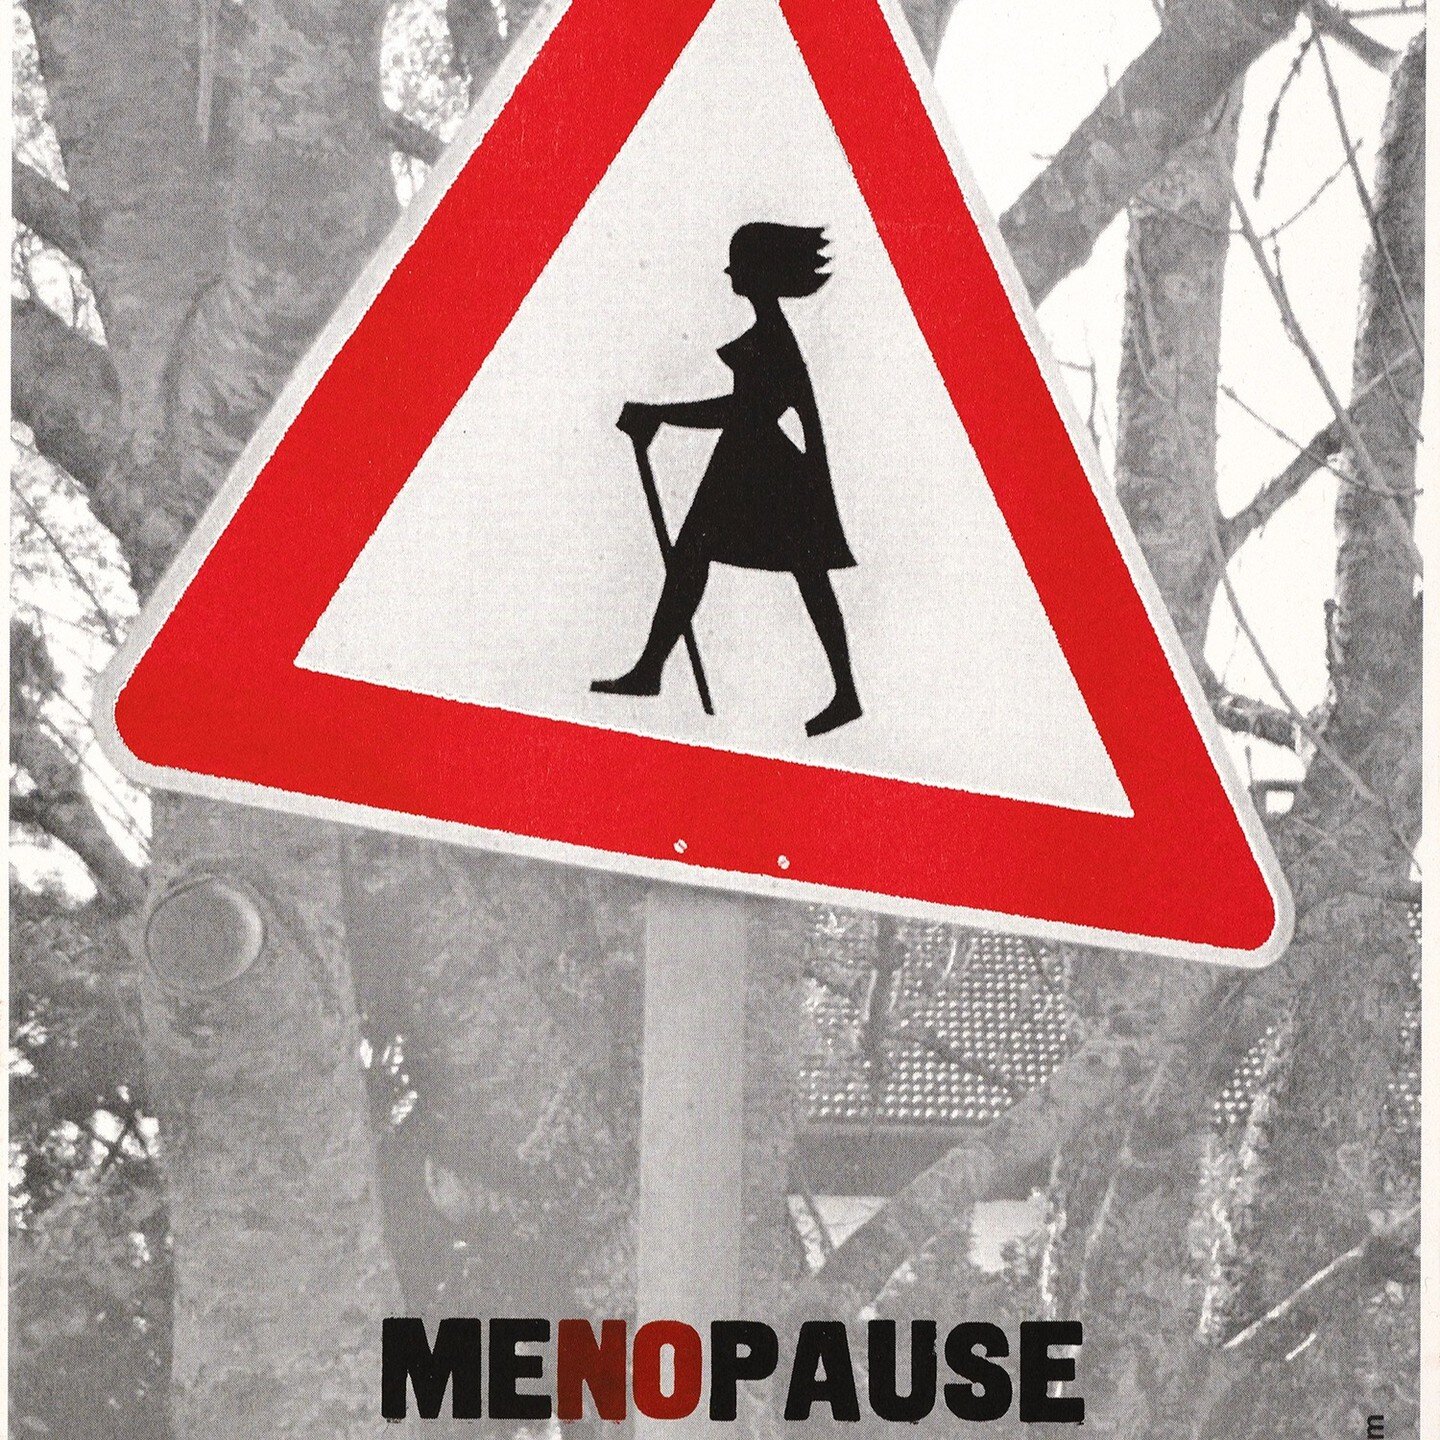 H&auml;ppy International Women's Day!
Visit my website if you are interested in one of my meNOpause or menOpause prints.
www.claudiazeiske/blog